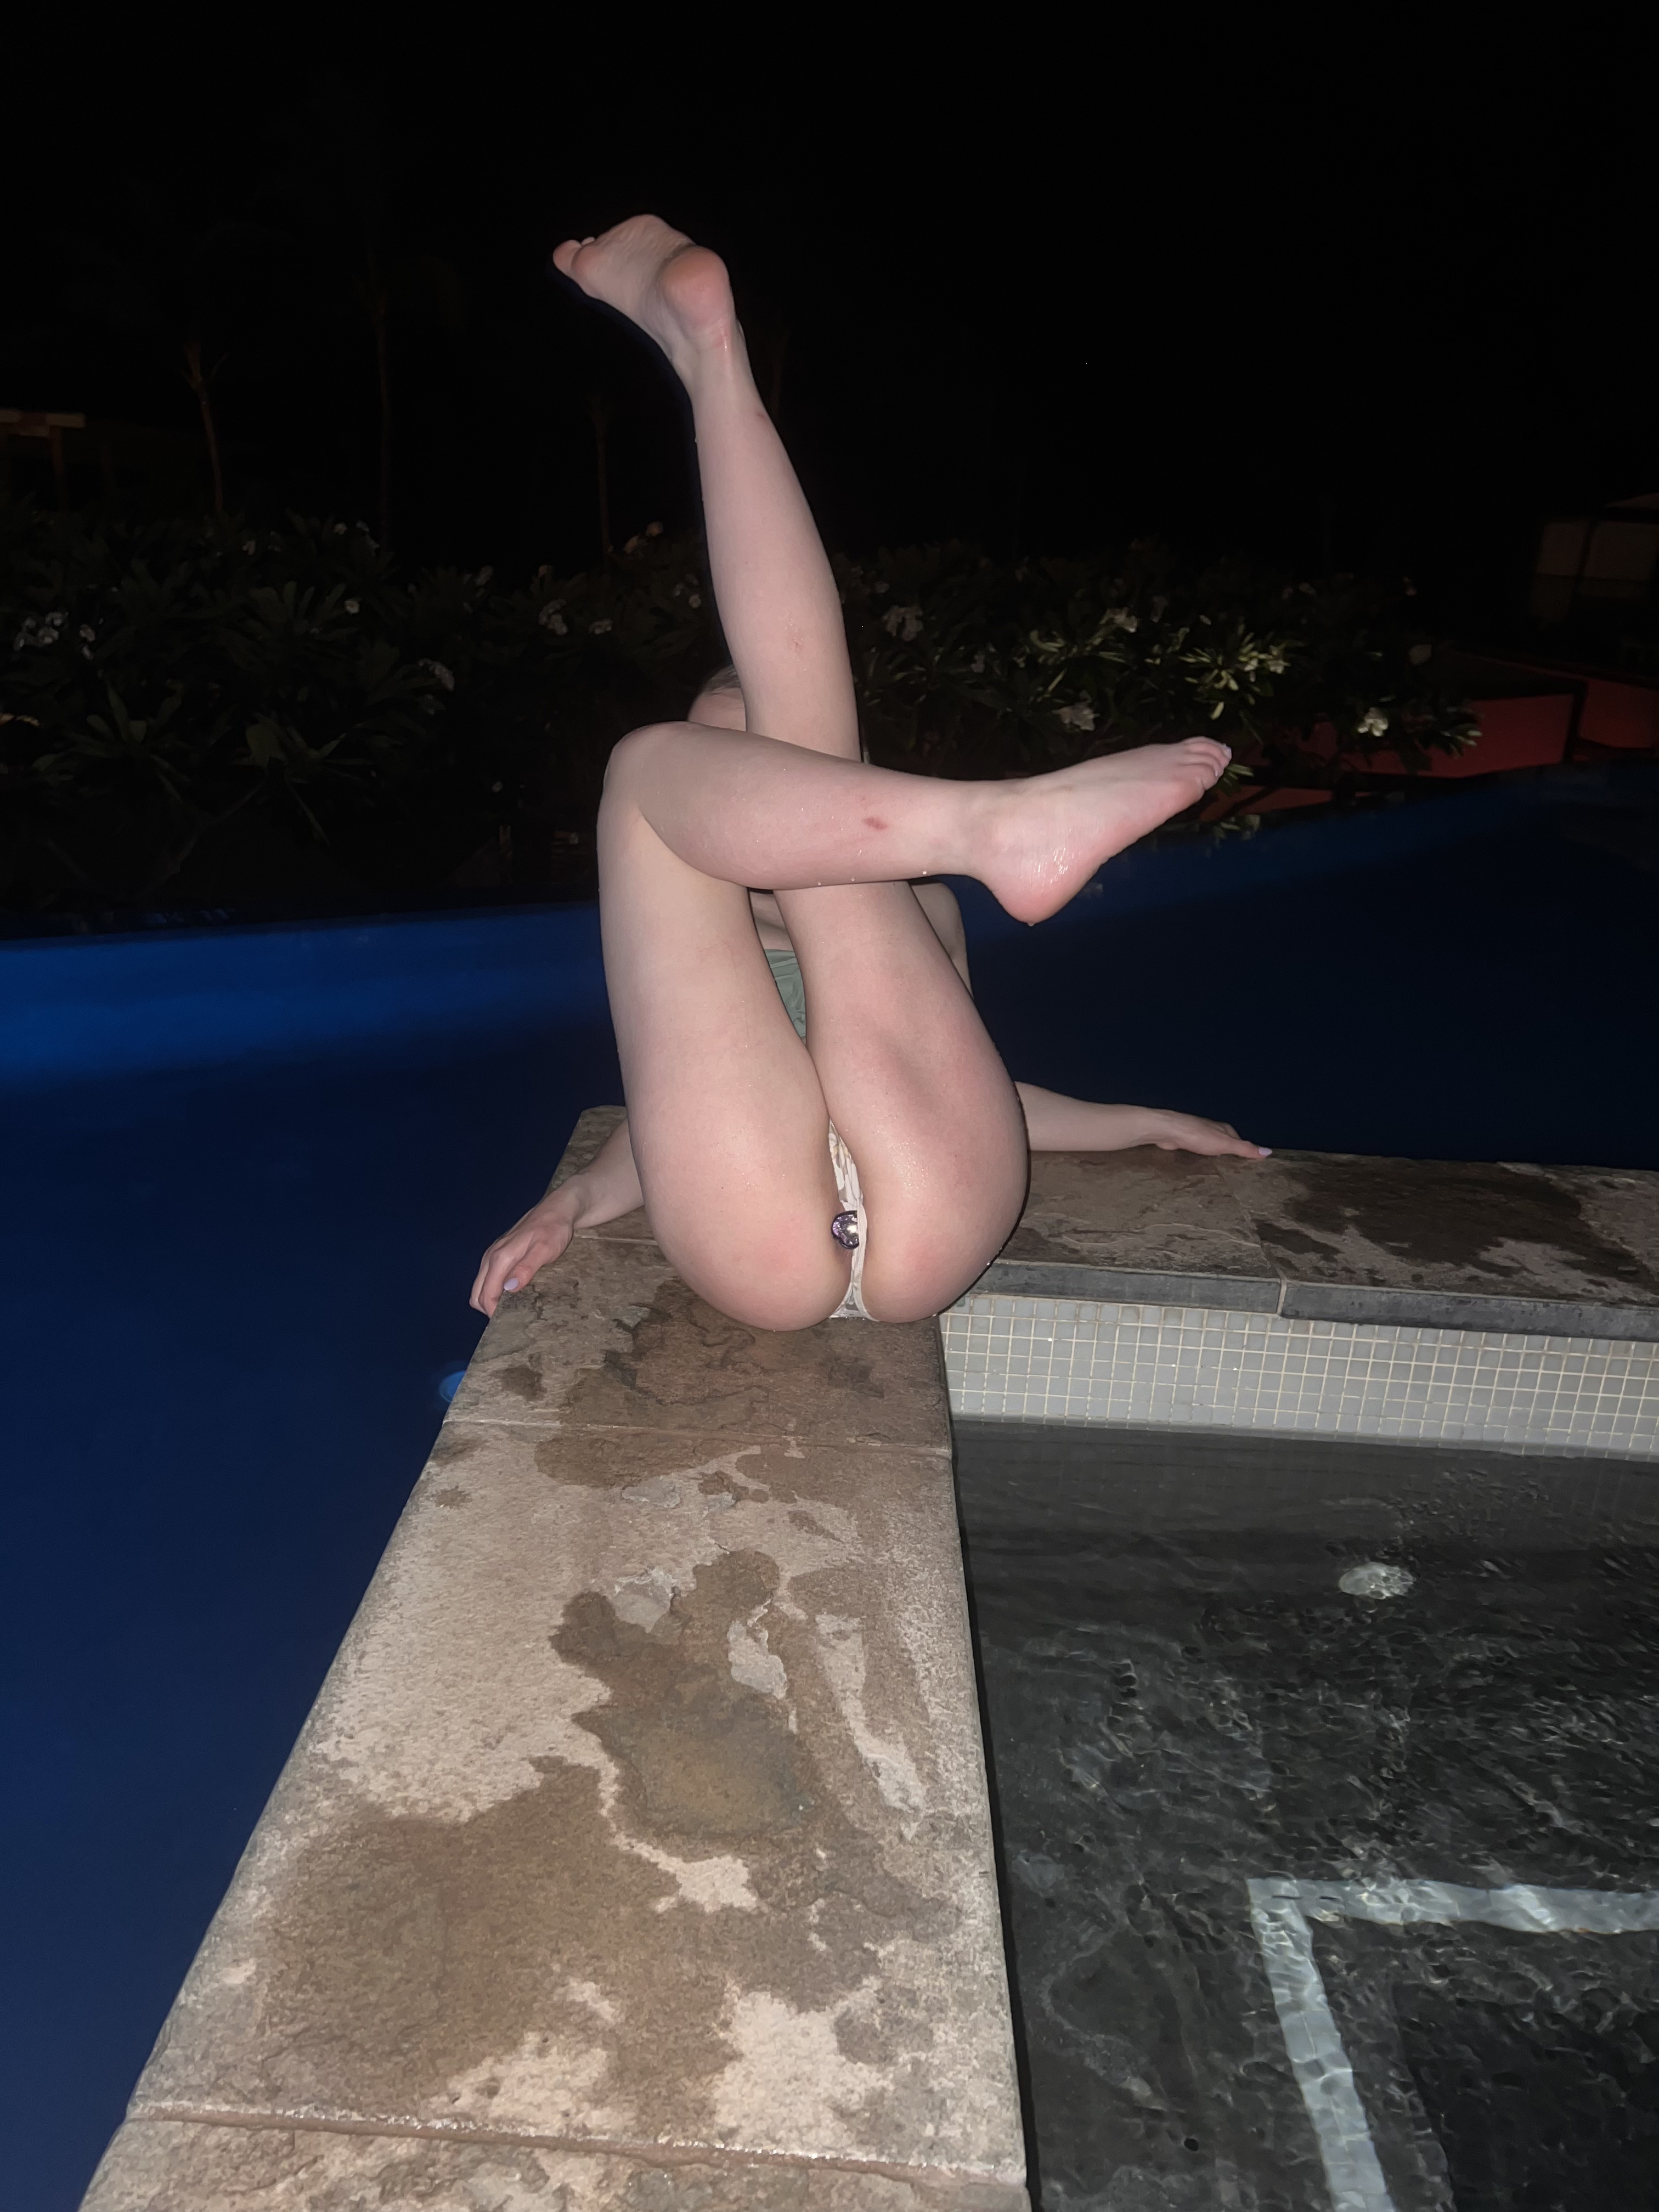 Drunk and showing off my plug in the public hotel hot tub in Maui picture